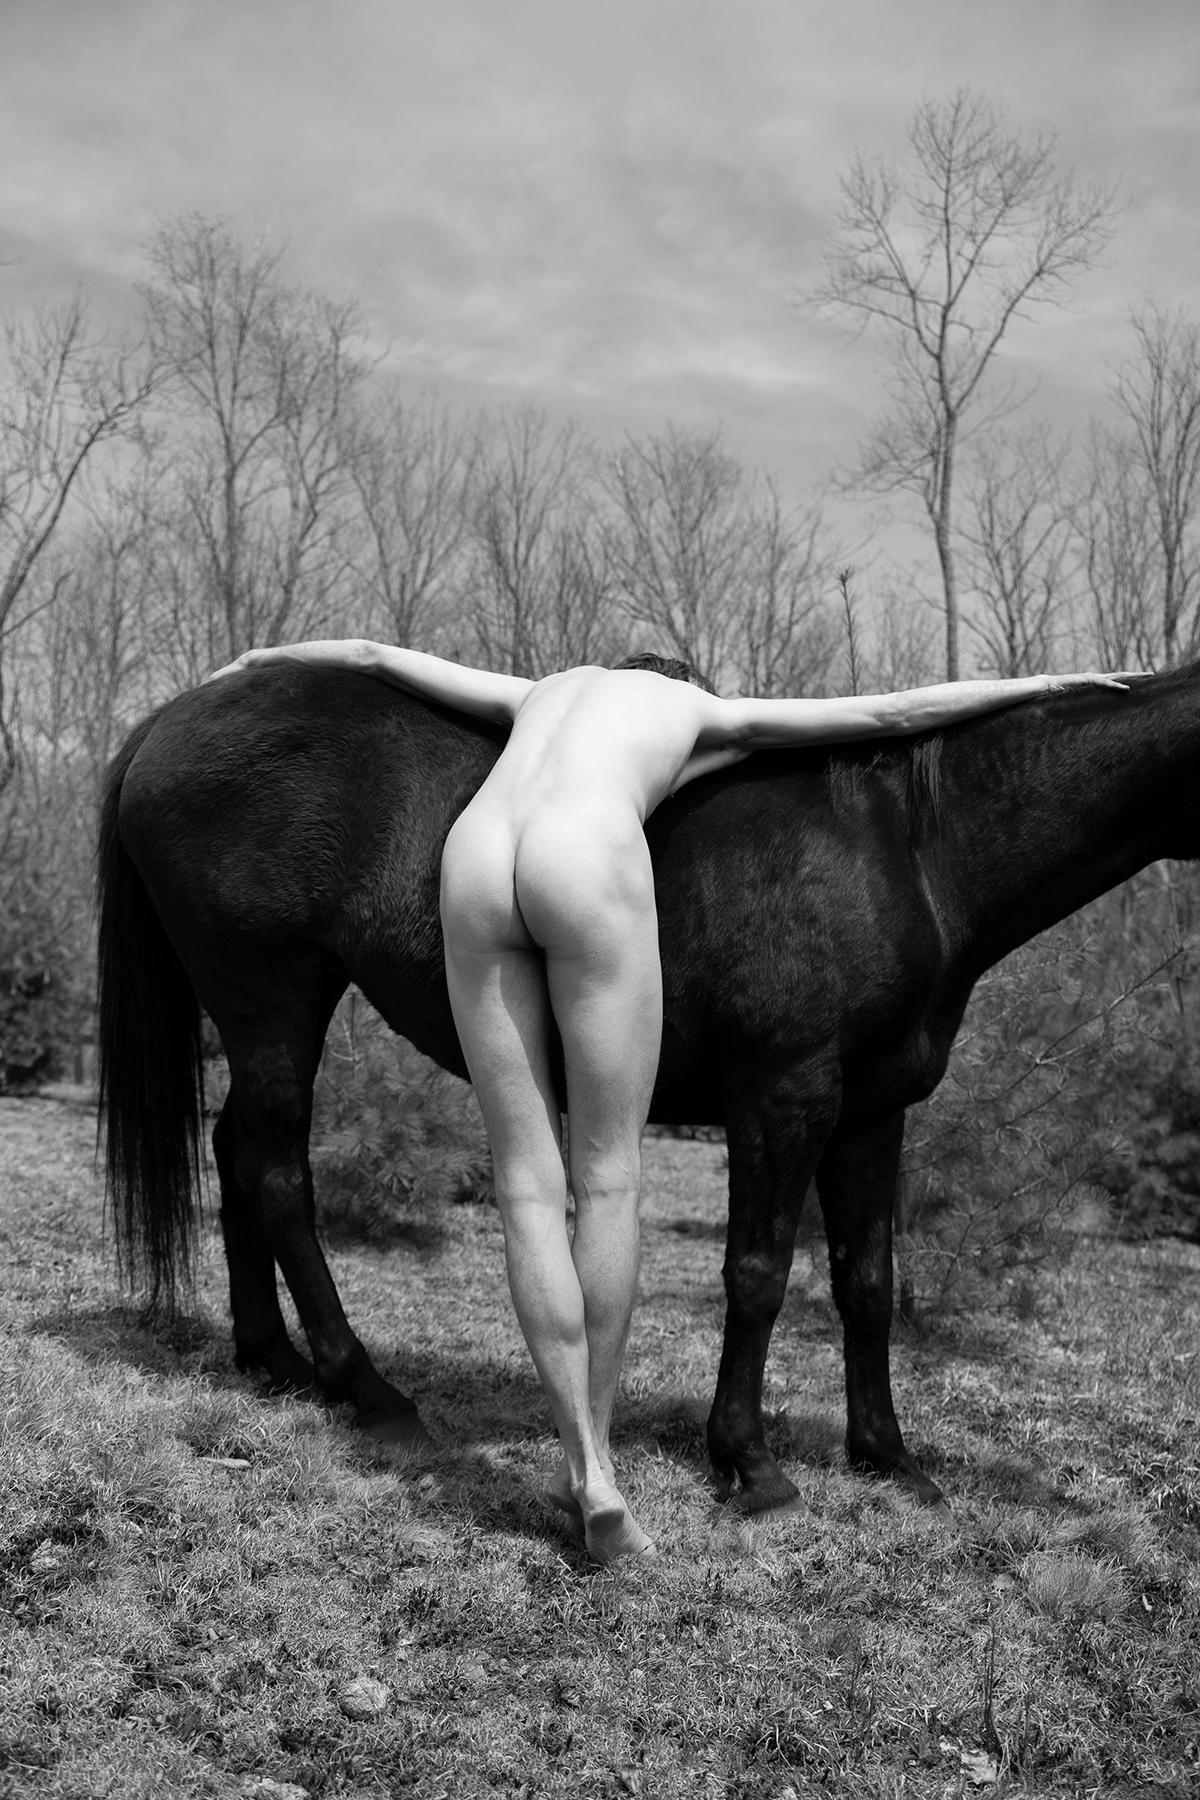 Ricky Cohete Figurative Photograph - Untitled 2. From The series Horse and Dancer. Male Nude Dancer B & W Photograph